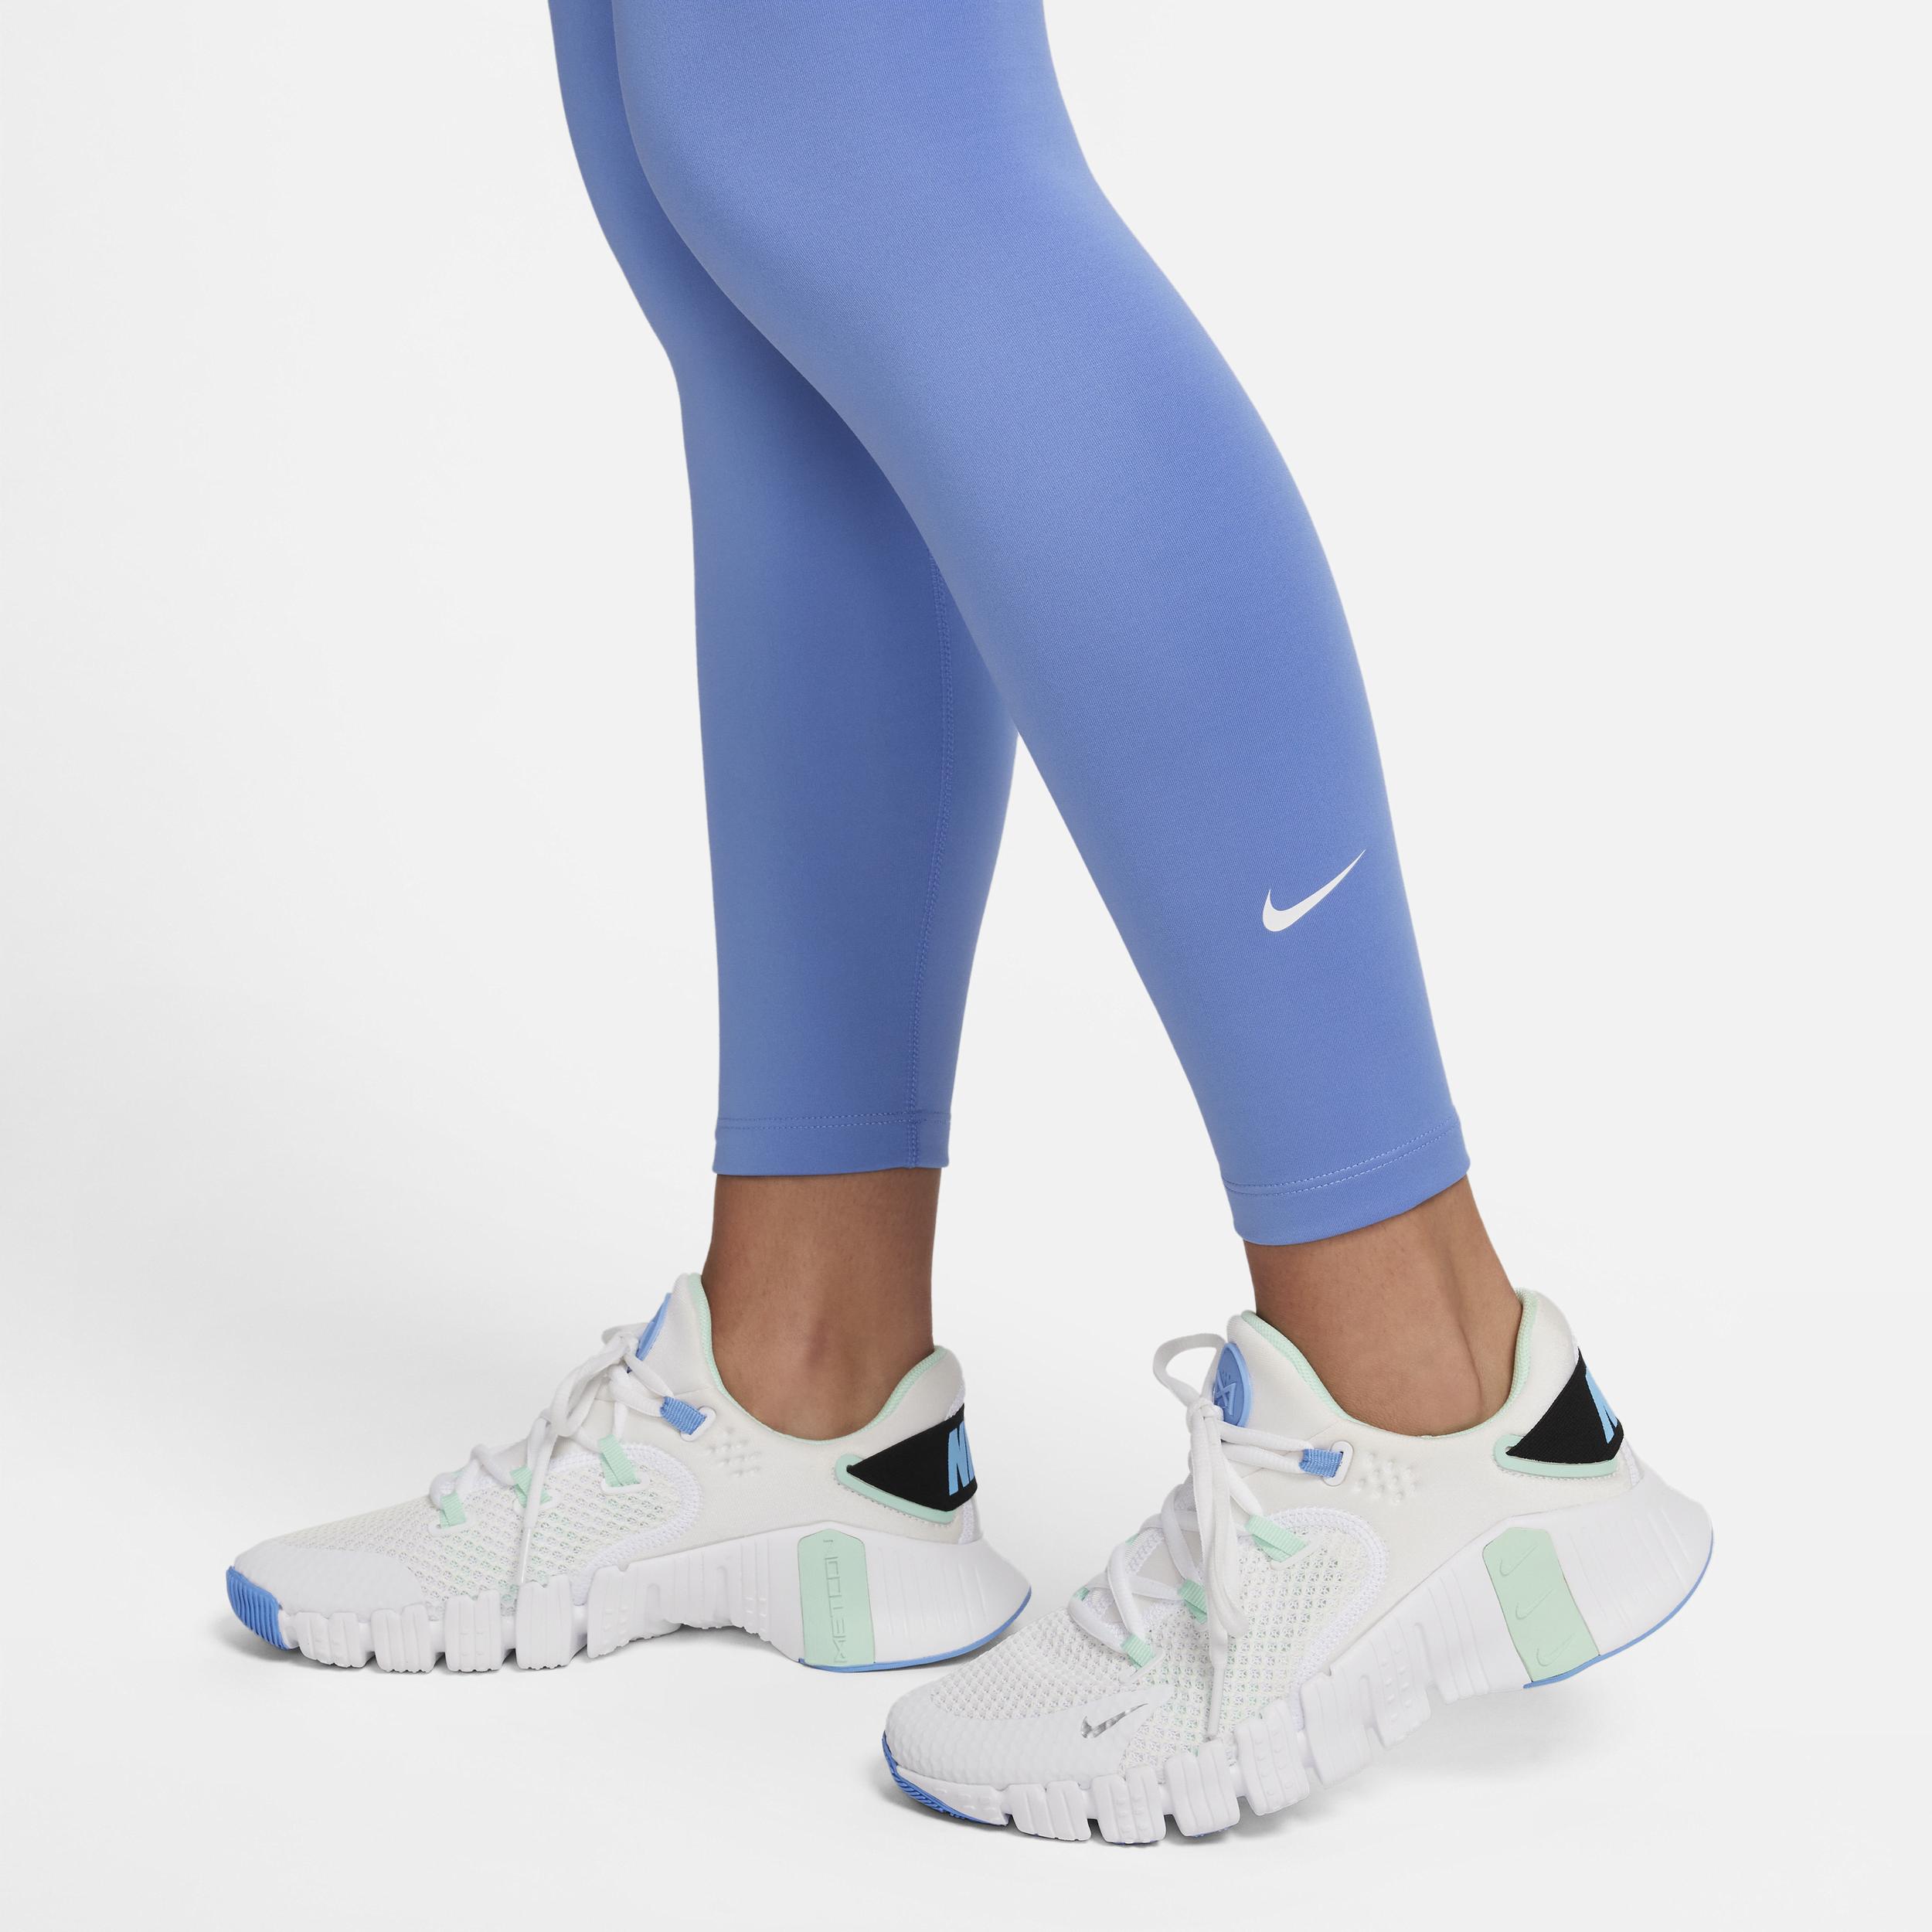 Nike Therma-fit One High-waisted 7/8 Leggings in Blue